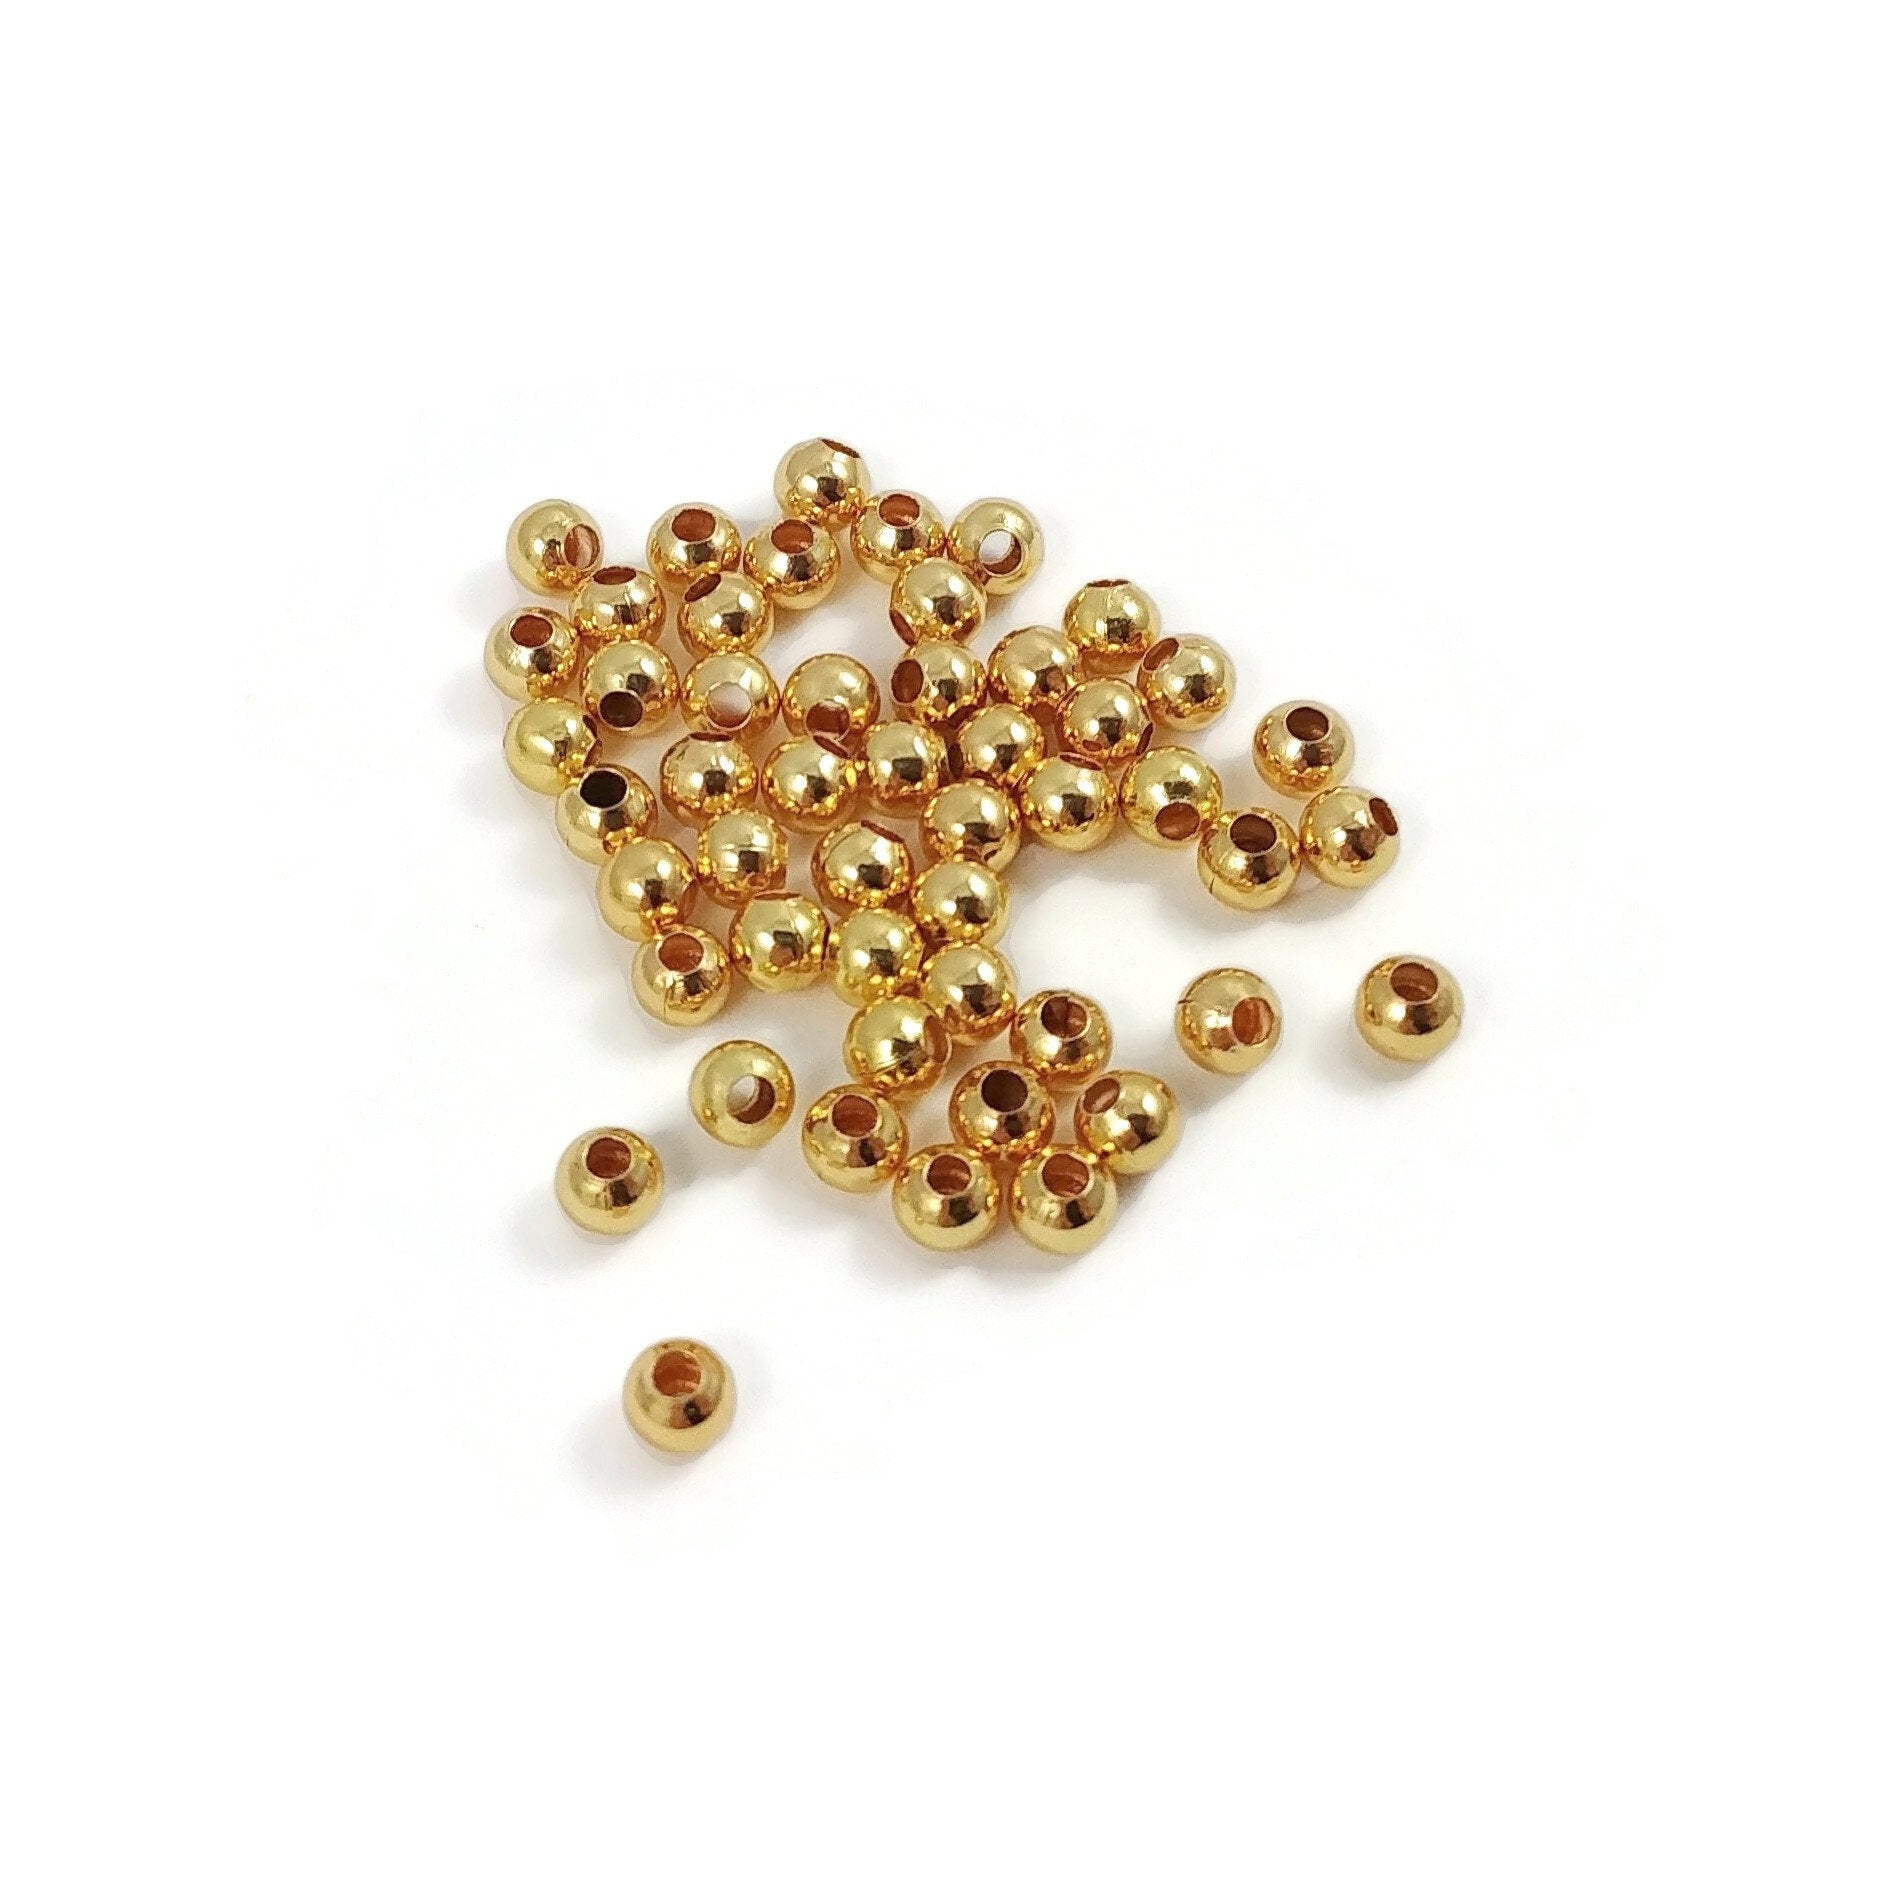  GUNKY 100PCS 18K 4MM Gold Filled Beads Gold Filled Spacer Beads  4MM Gold Plated Beads for Jewelry Making 4MM 14K Gold Filled Round Beads  Gold Spacer Beads : Arts, Crafts 